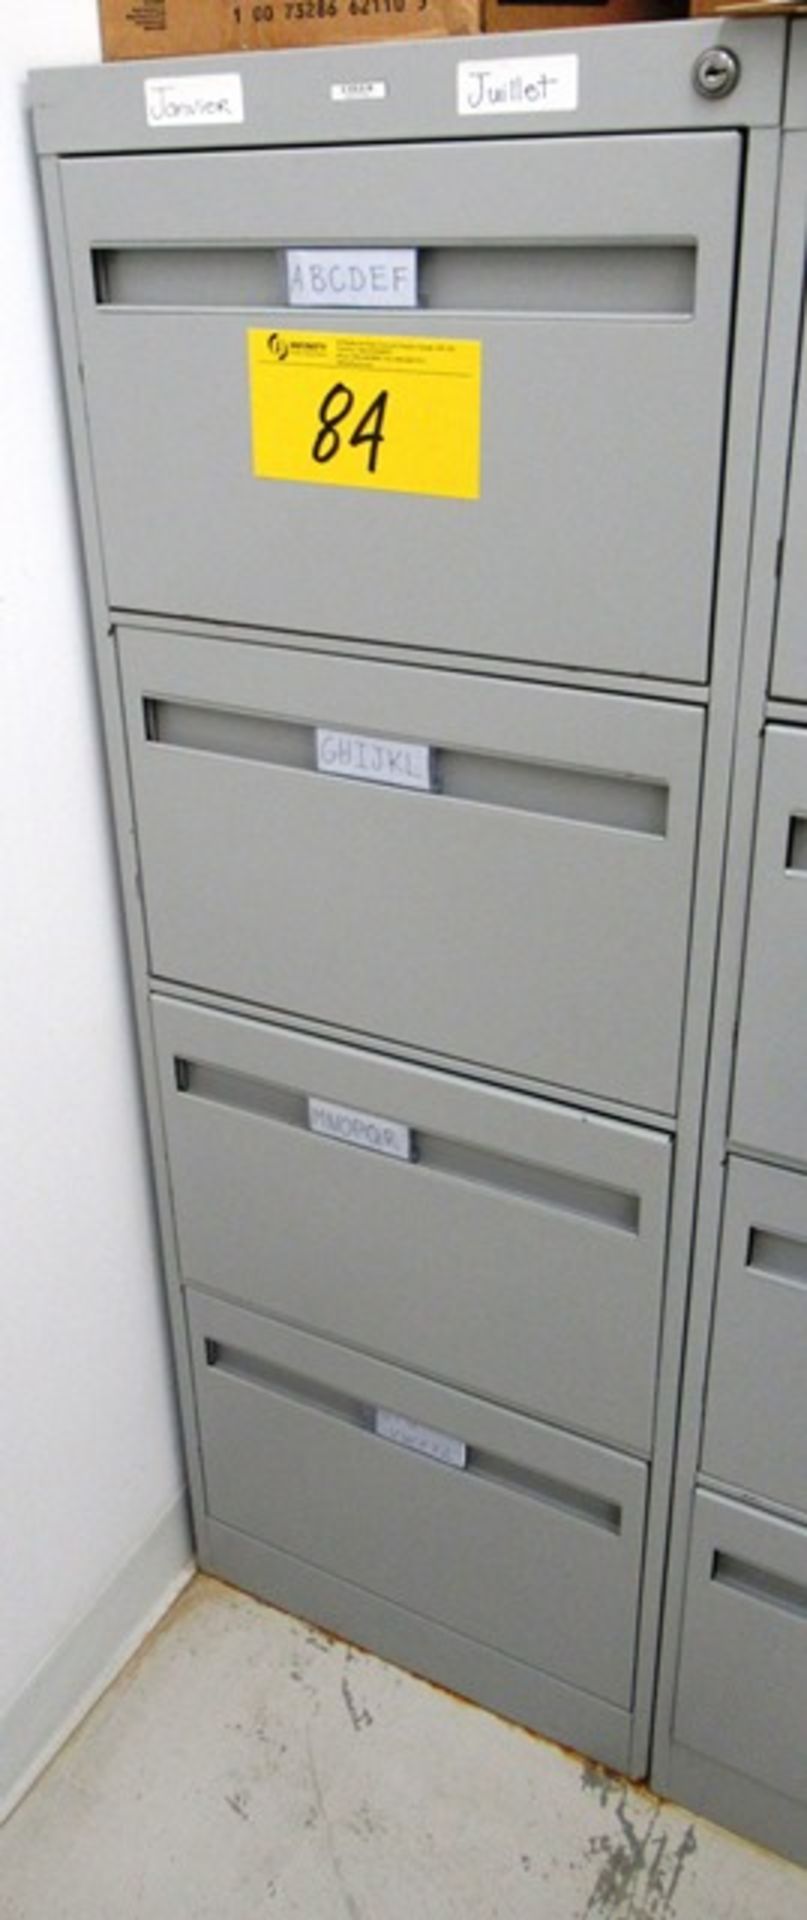 COLE 4 DRAWER FILING CABINET